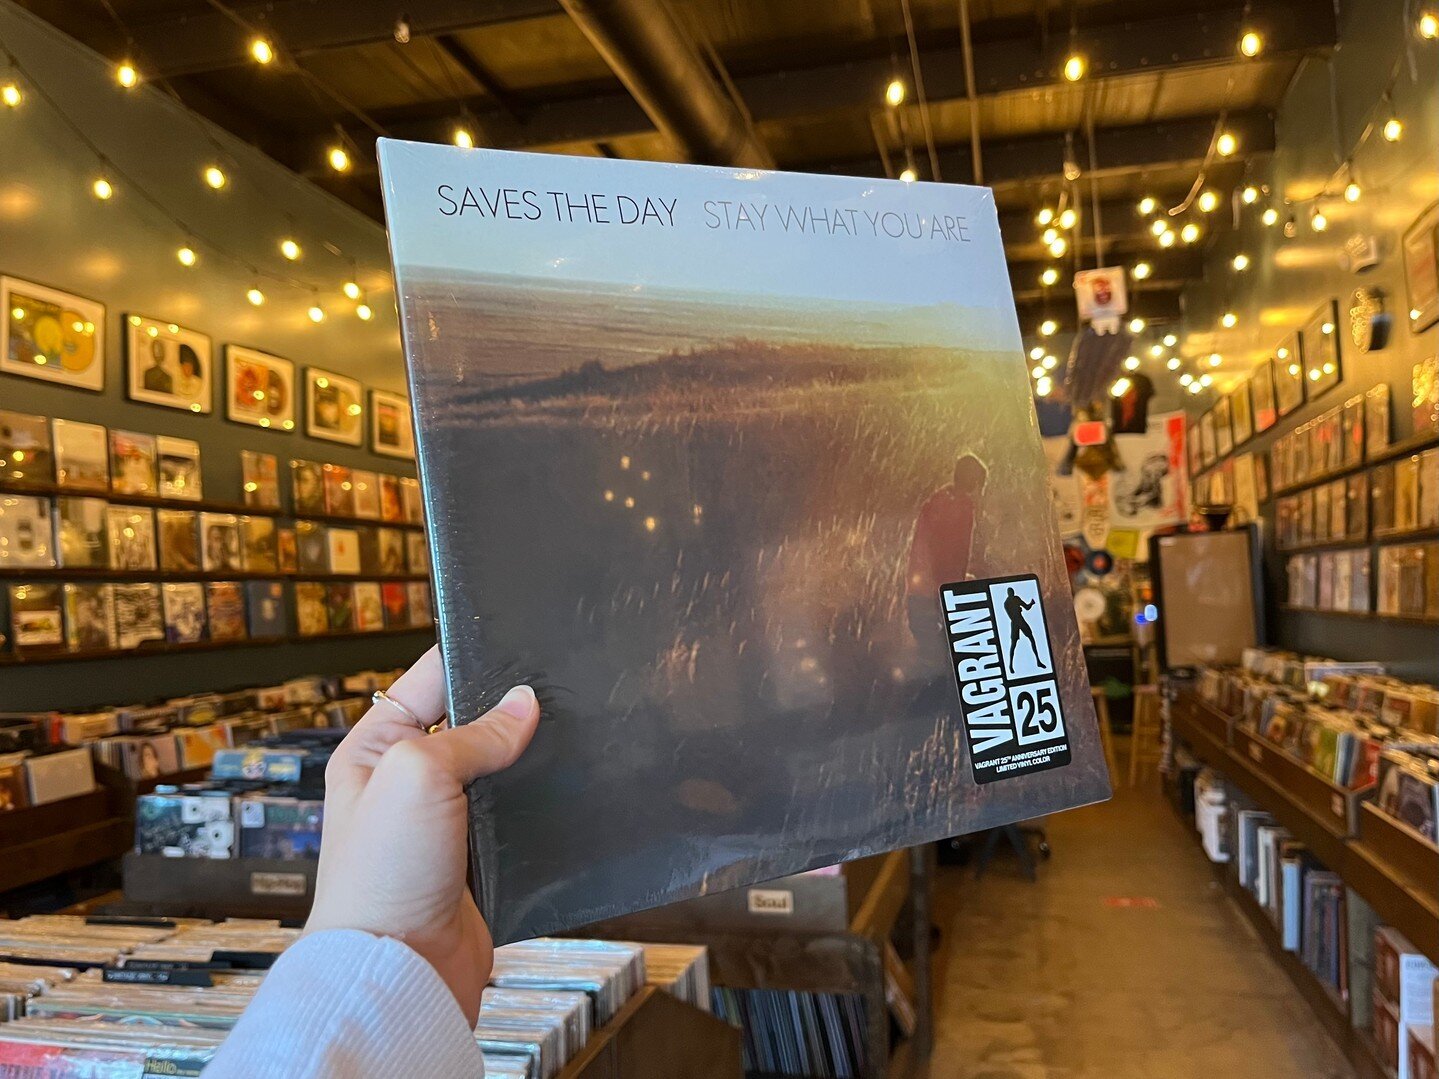 finally getting some Saves The Day represses of &quot;Stay What You Are&quot; and &quot;Sound The Alarm&quot;, both on colored 10&quot; vinyl!